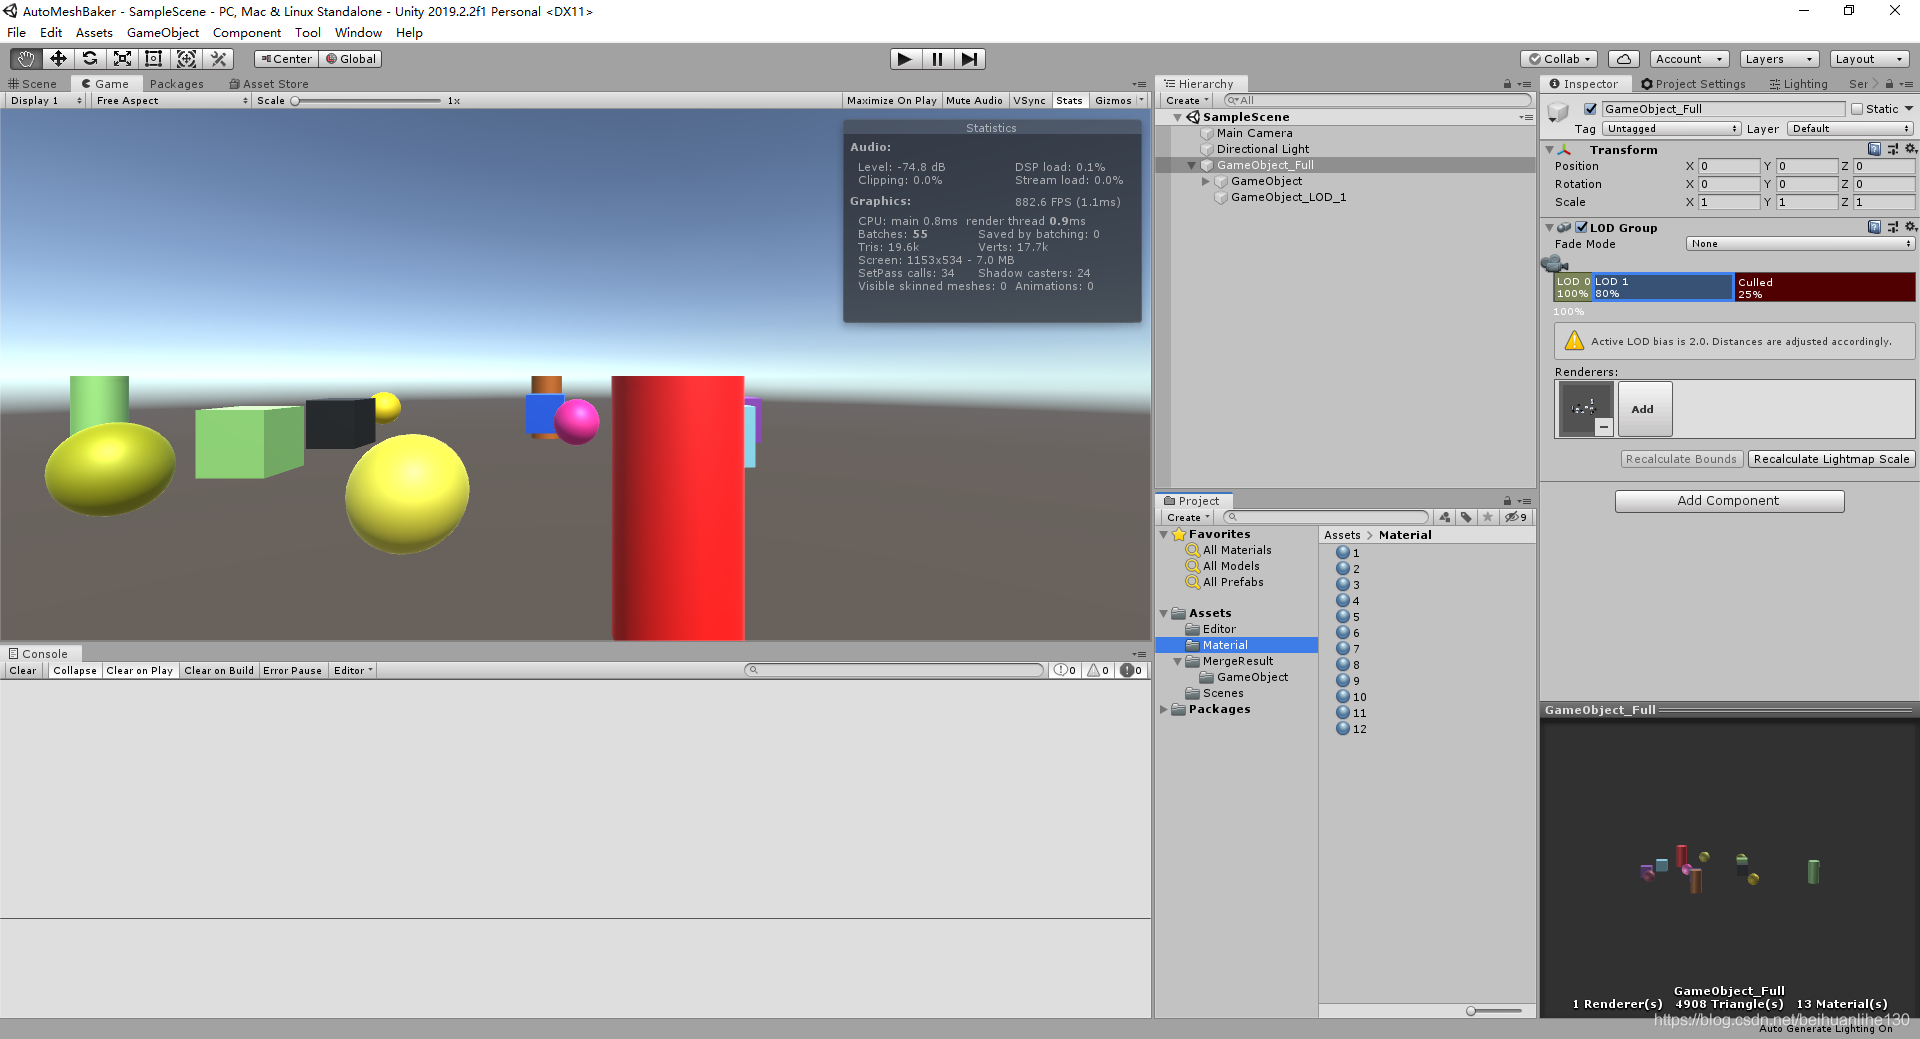 The effect after merging objects to generate LOD